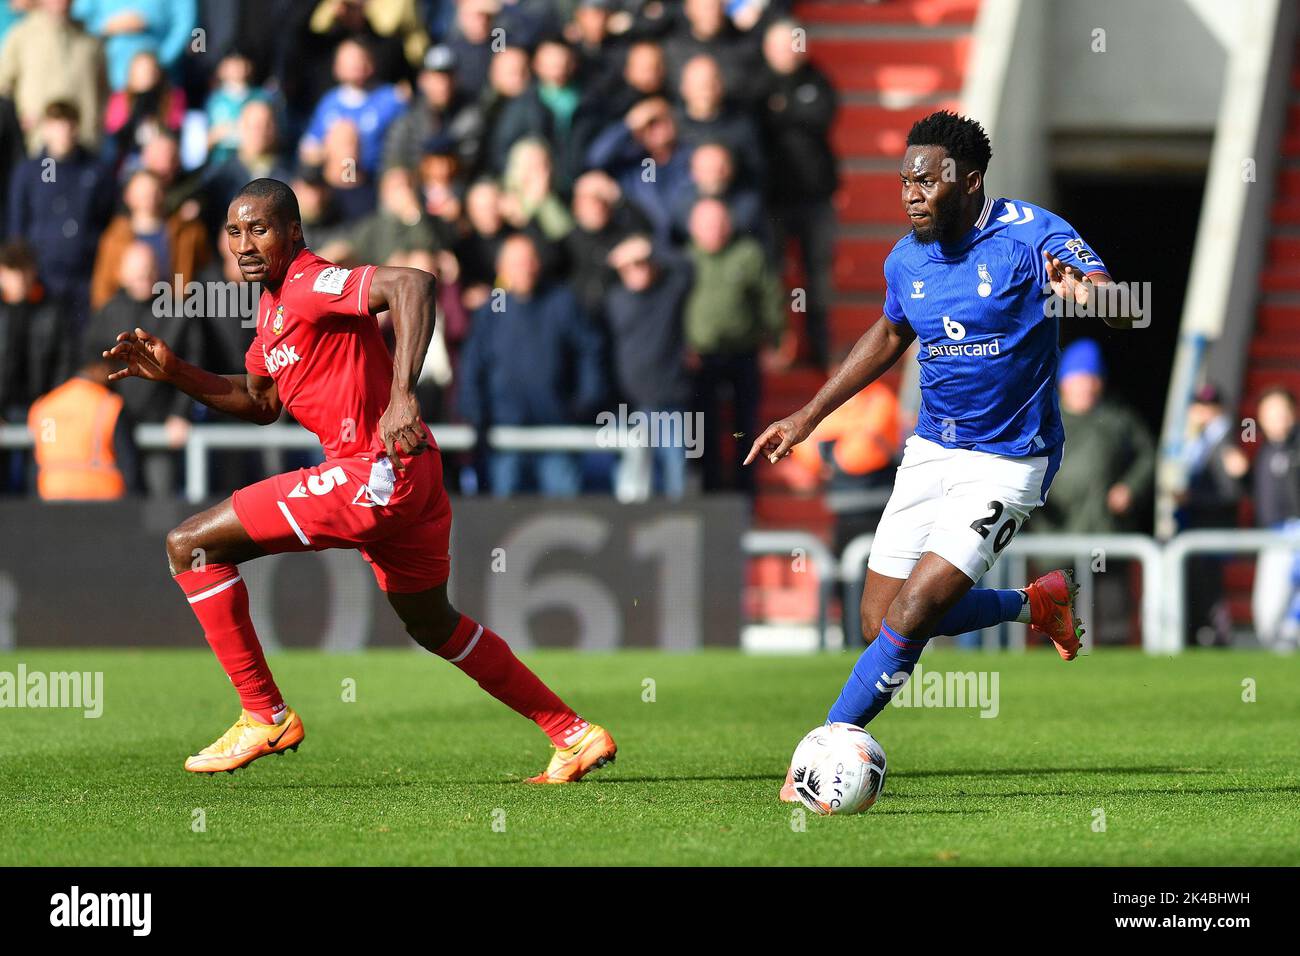 Oldham, UK. 1st October 2022during the Vanarama National League match between Oldham Athletic and Wrexham at Boundary Park, Oldham on Saturday 1st October 2022Mike Fondop-Talom of Oldham Athletic tussles with Aaron Hayden of Wrexham Football Club during the Vanarama National League match between Oldham Athletic and Wrexham at Boundary Park, Oldham on Saturday 1st October 2022. Credit: MI News & Sport /Alamy Live News Stock Photo